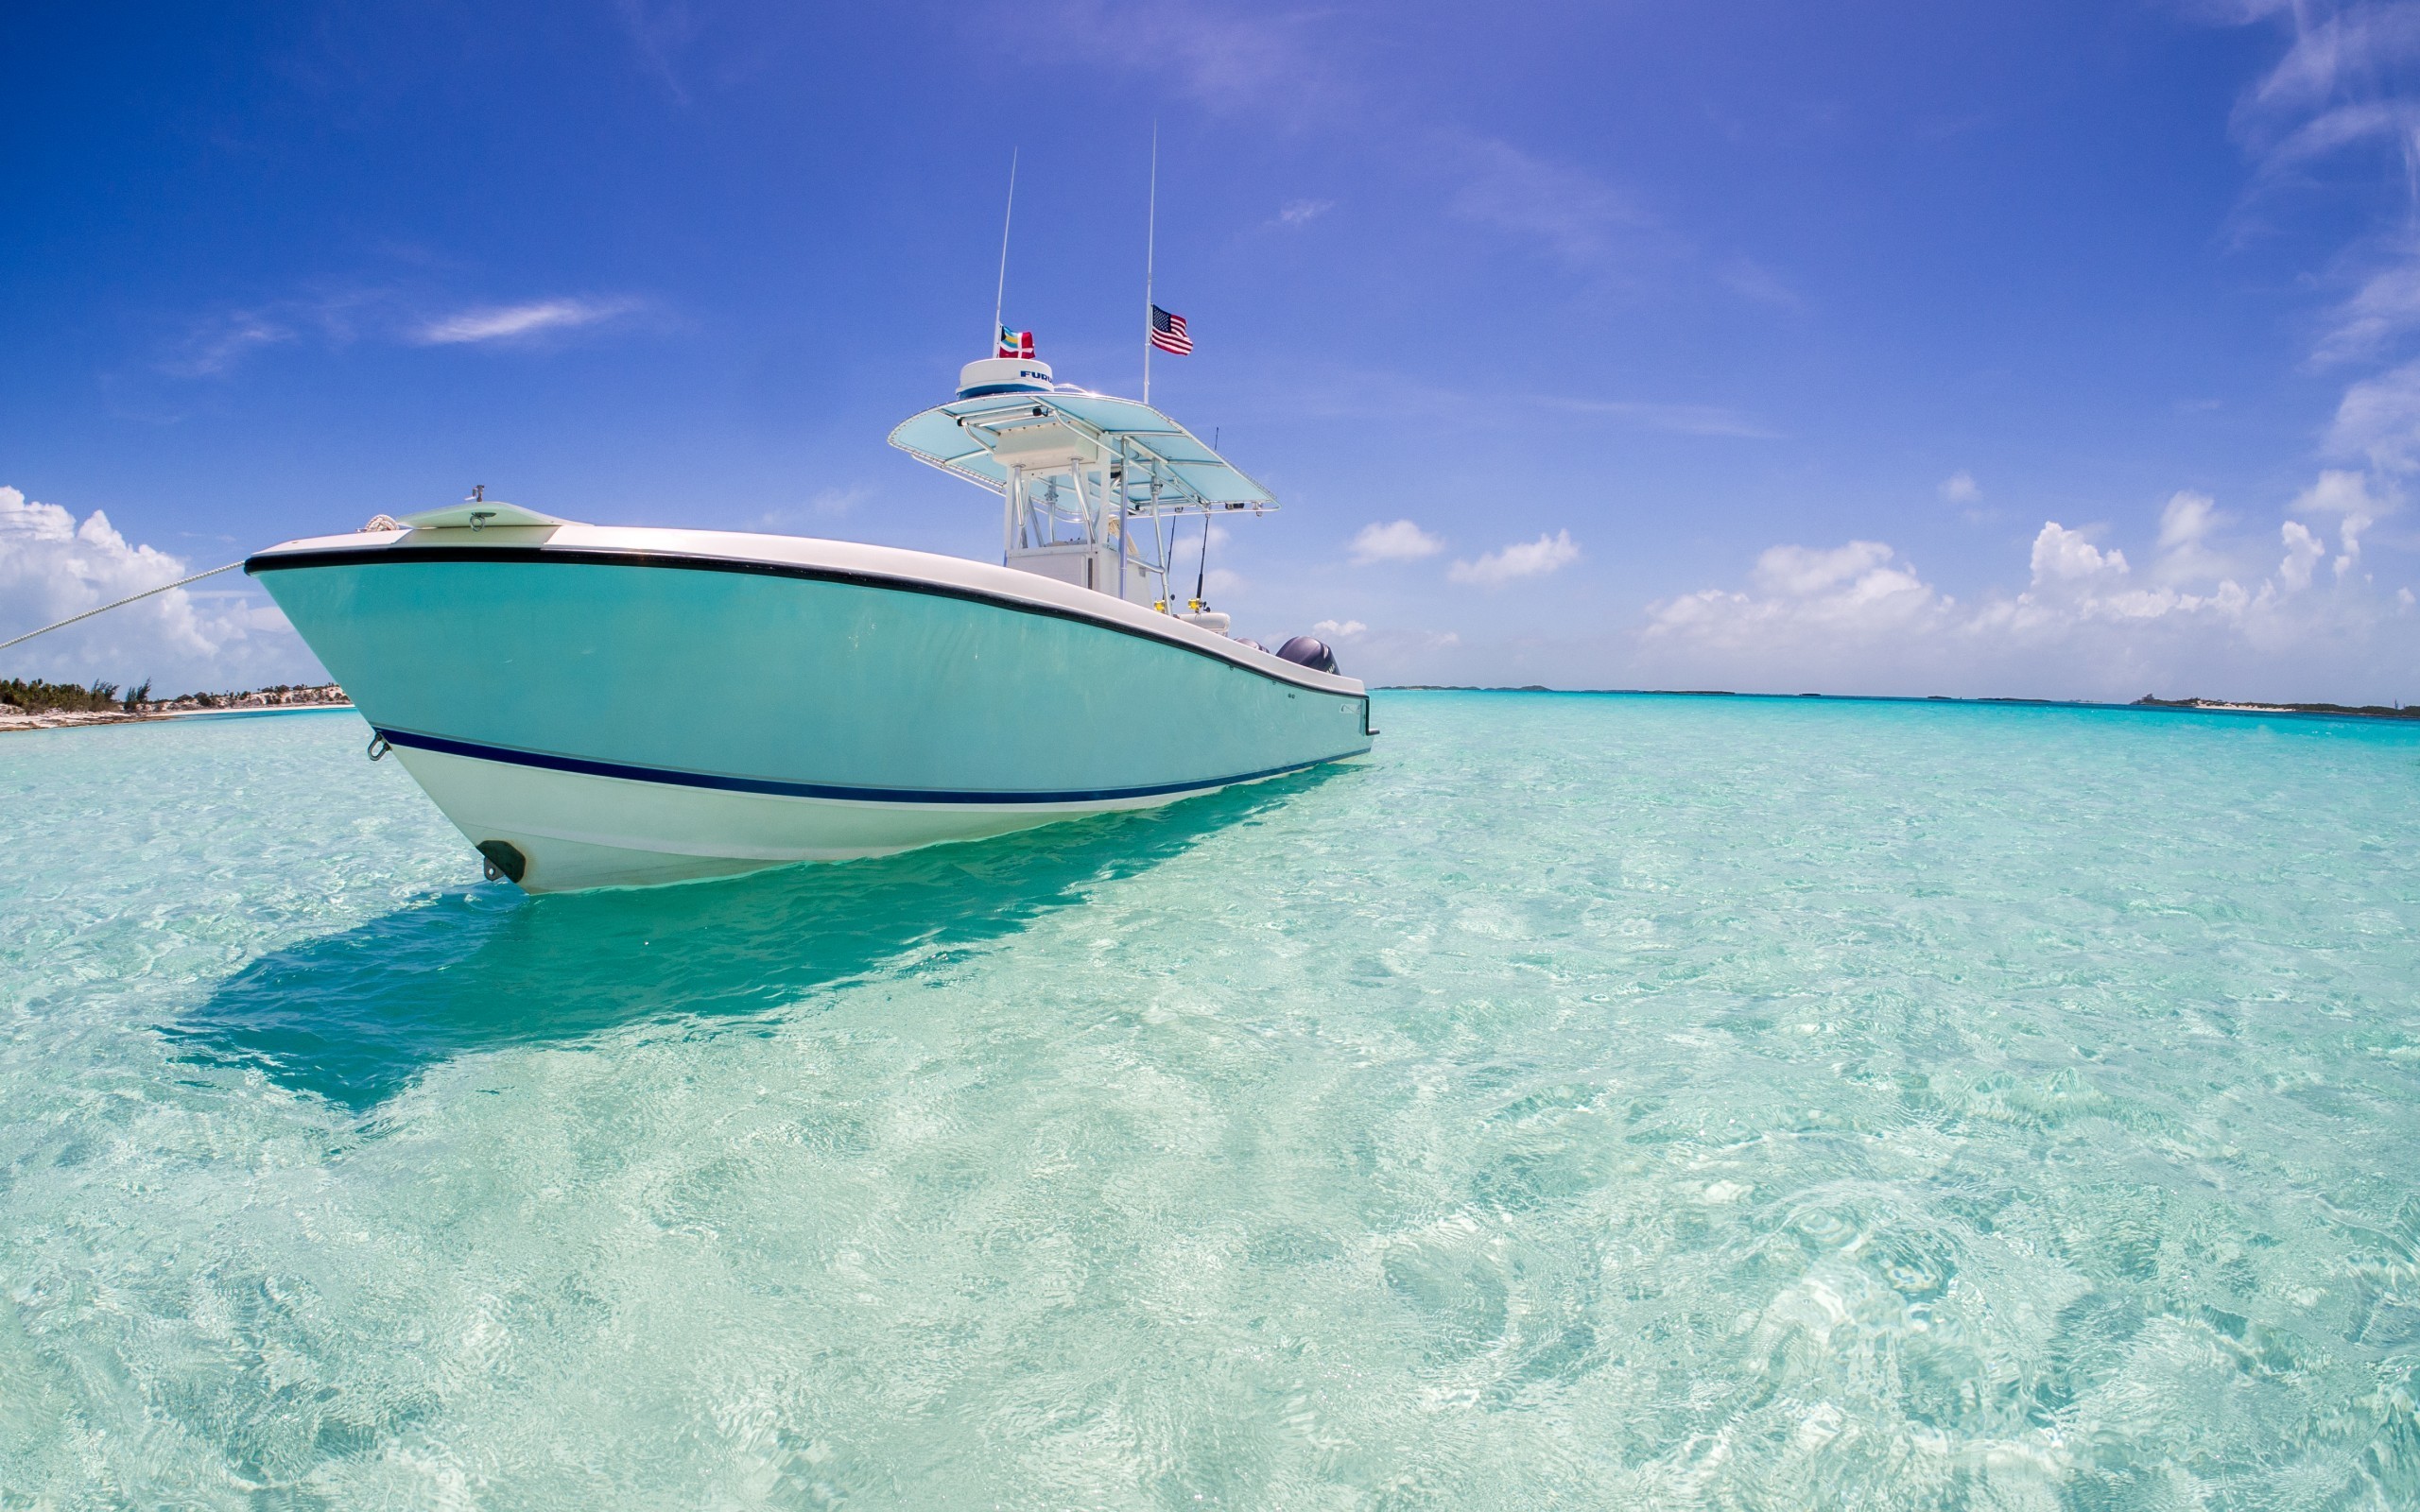 2560x1600 ... Nature Sea With Boat Wallpaper 14 Boat Nature Ocean Time Summer Sea Beach  Wallpaper Live ...